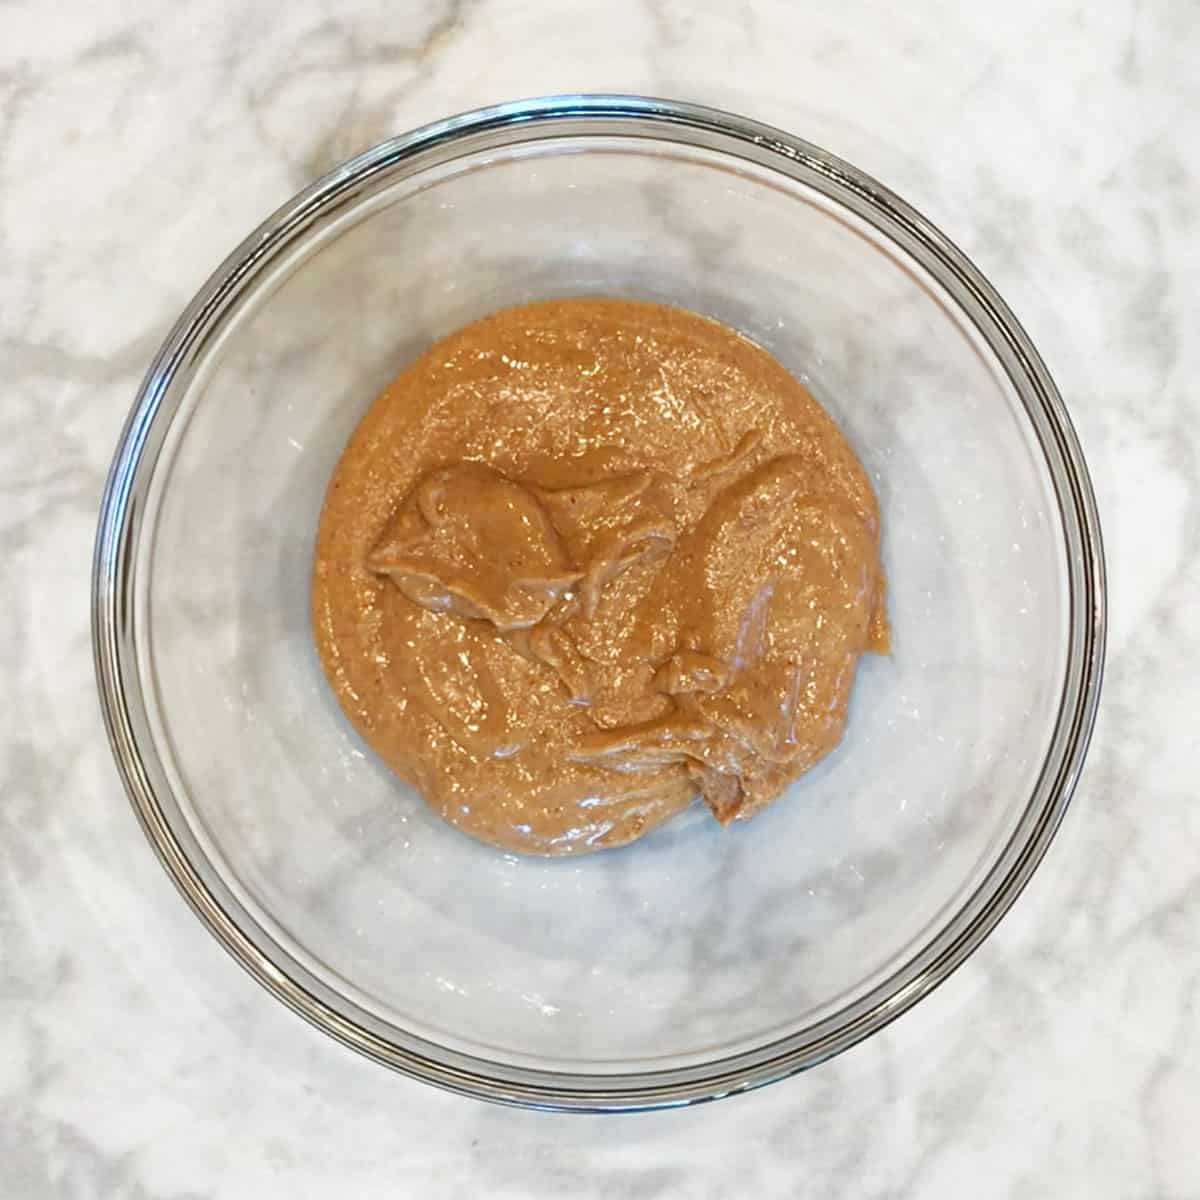 Peanut butter in a bowl, showing its texture.